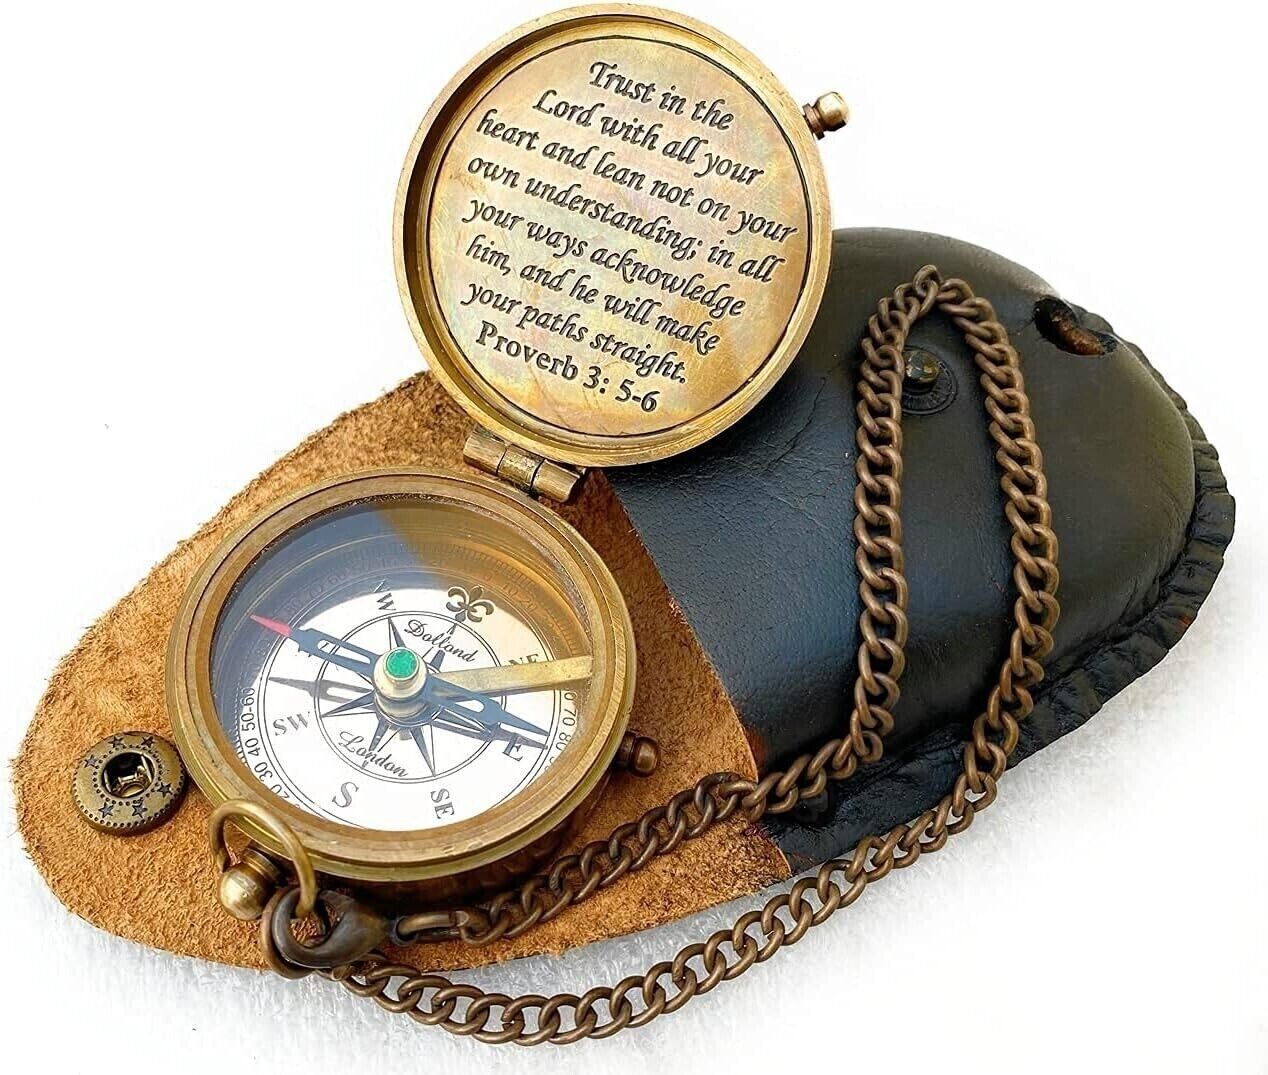 Proverb3: Brass Trust In The Lord Compass With Leather Case Nautical Decor Gift